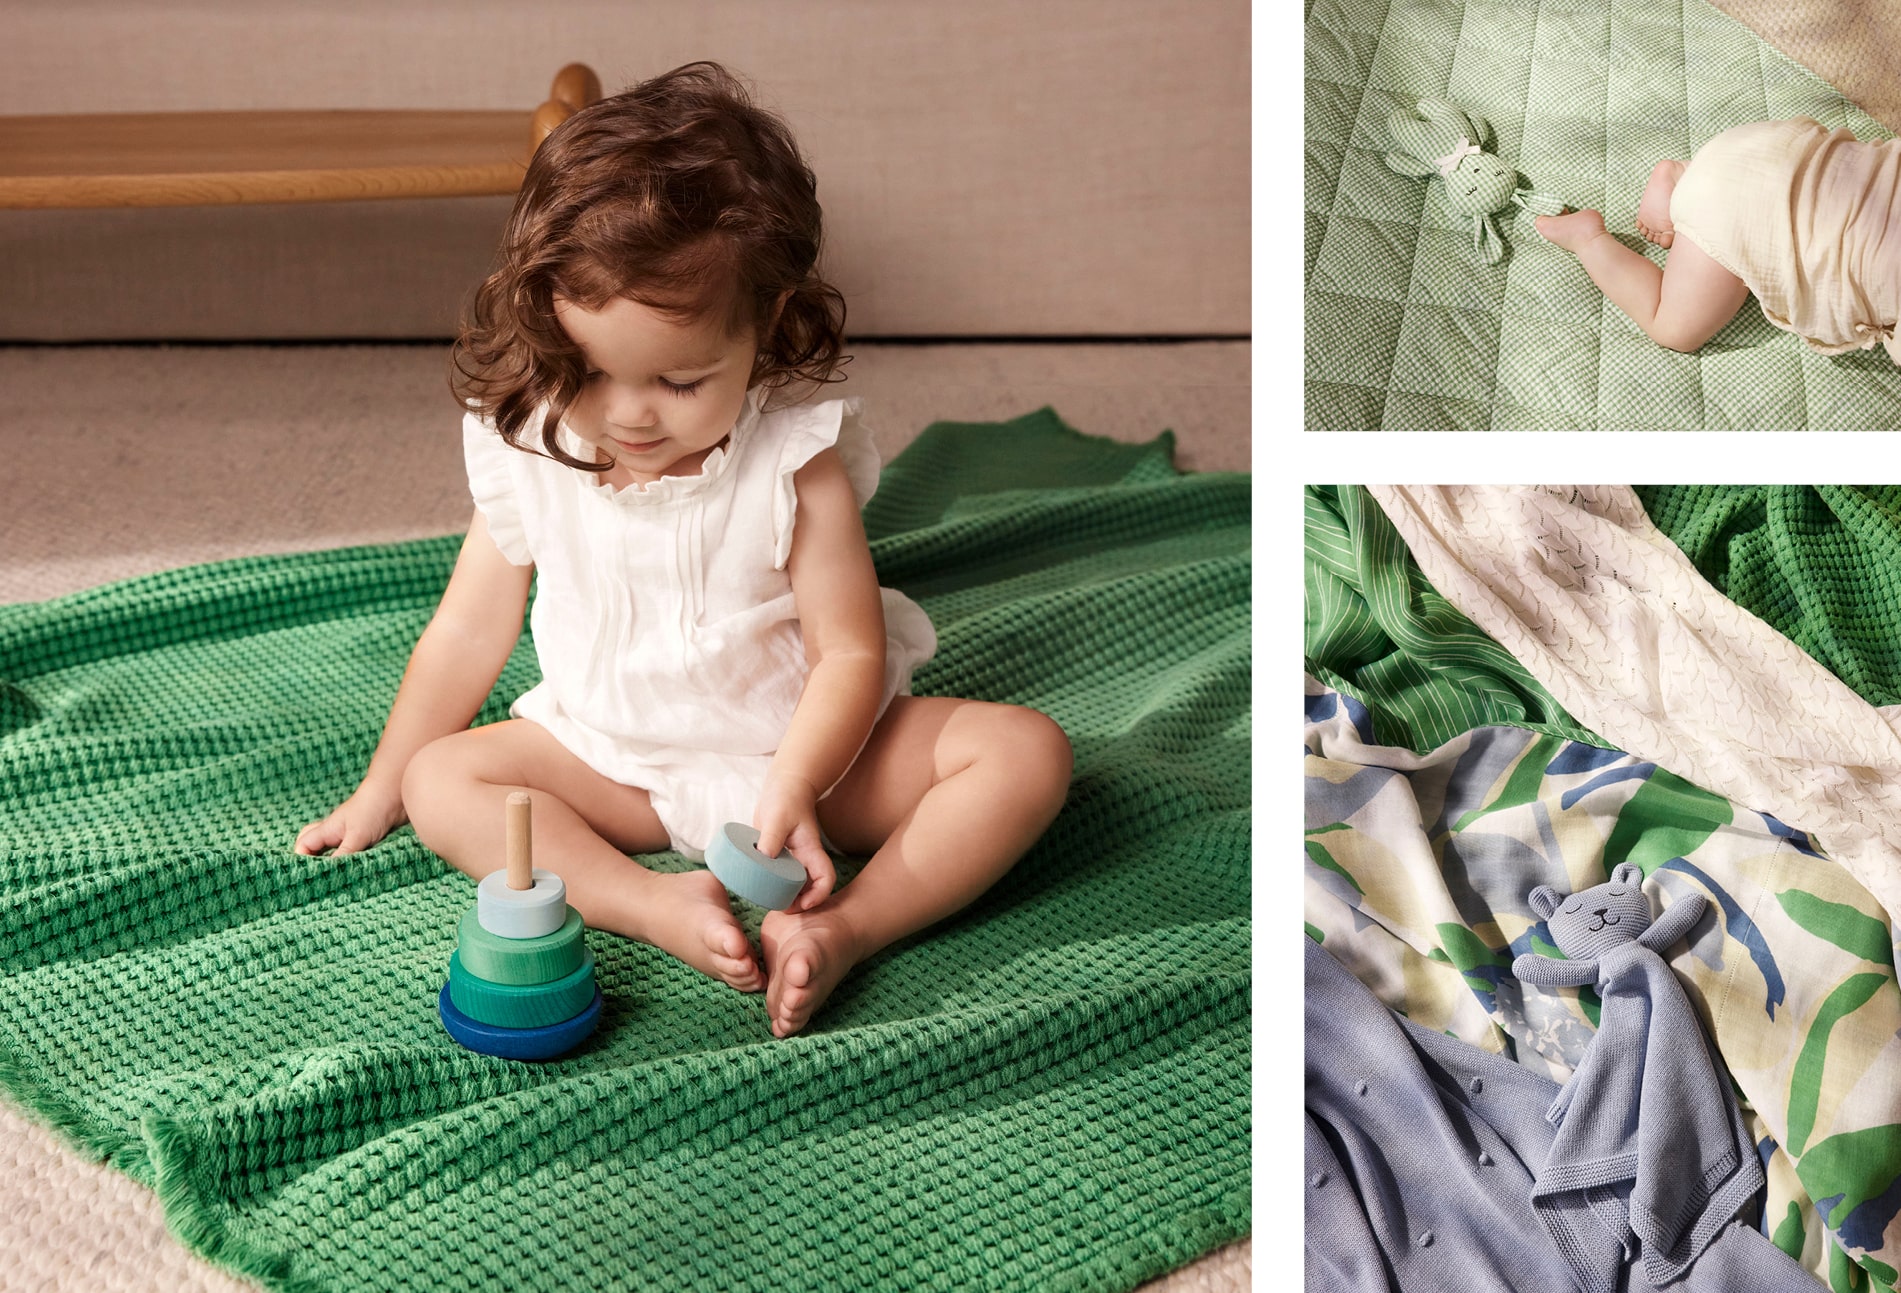 image divided in three. baby with curly hair and white top sits upright on green waffle blanket. righthand image is baby crawling on green chek quilted blanket. left image is layered blankets in greens and blues.